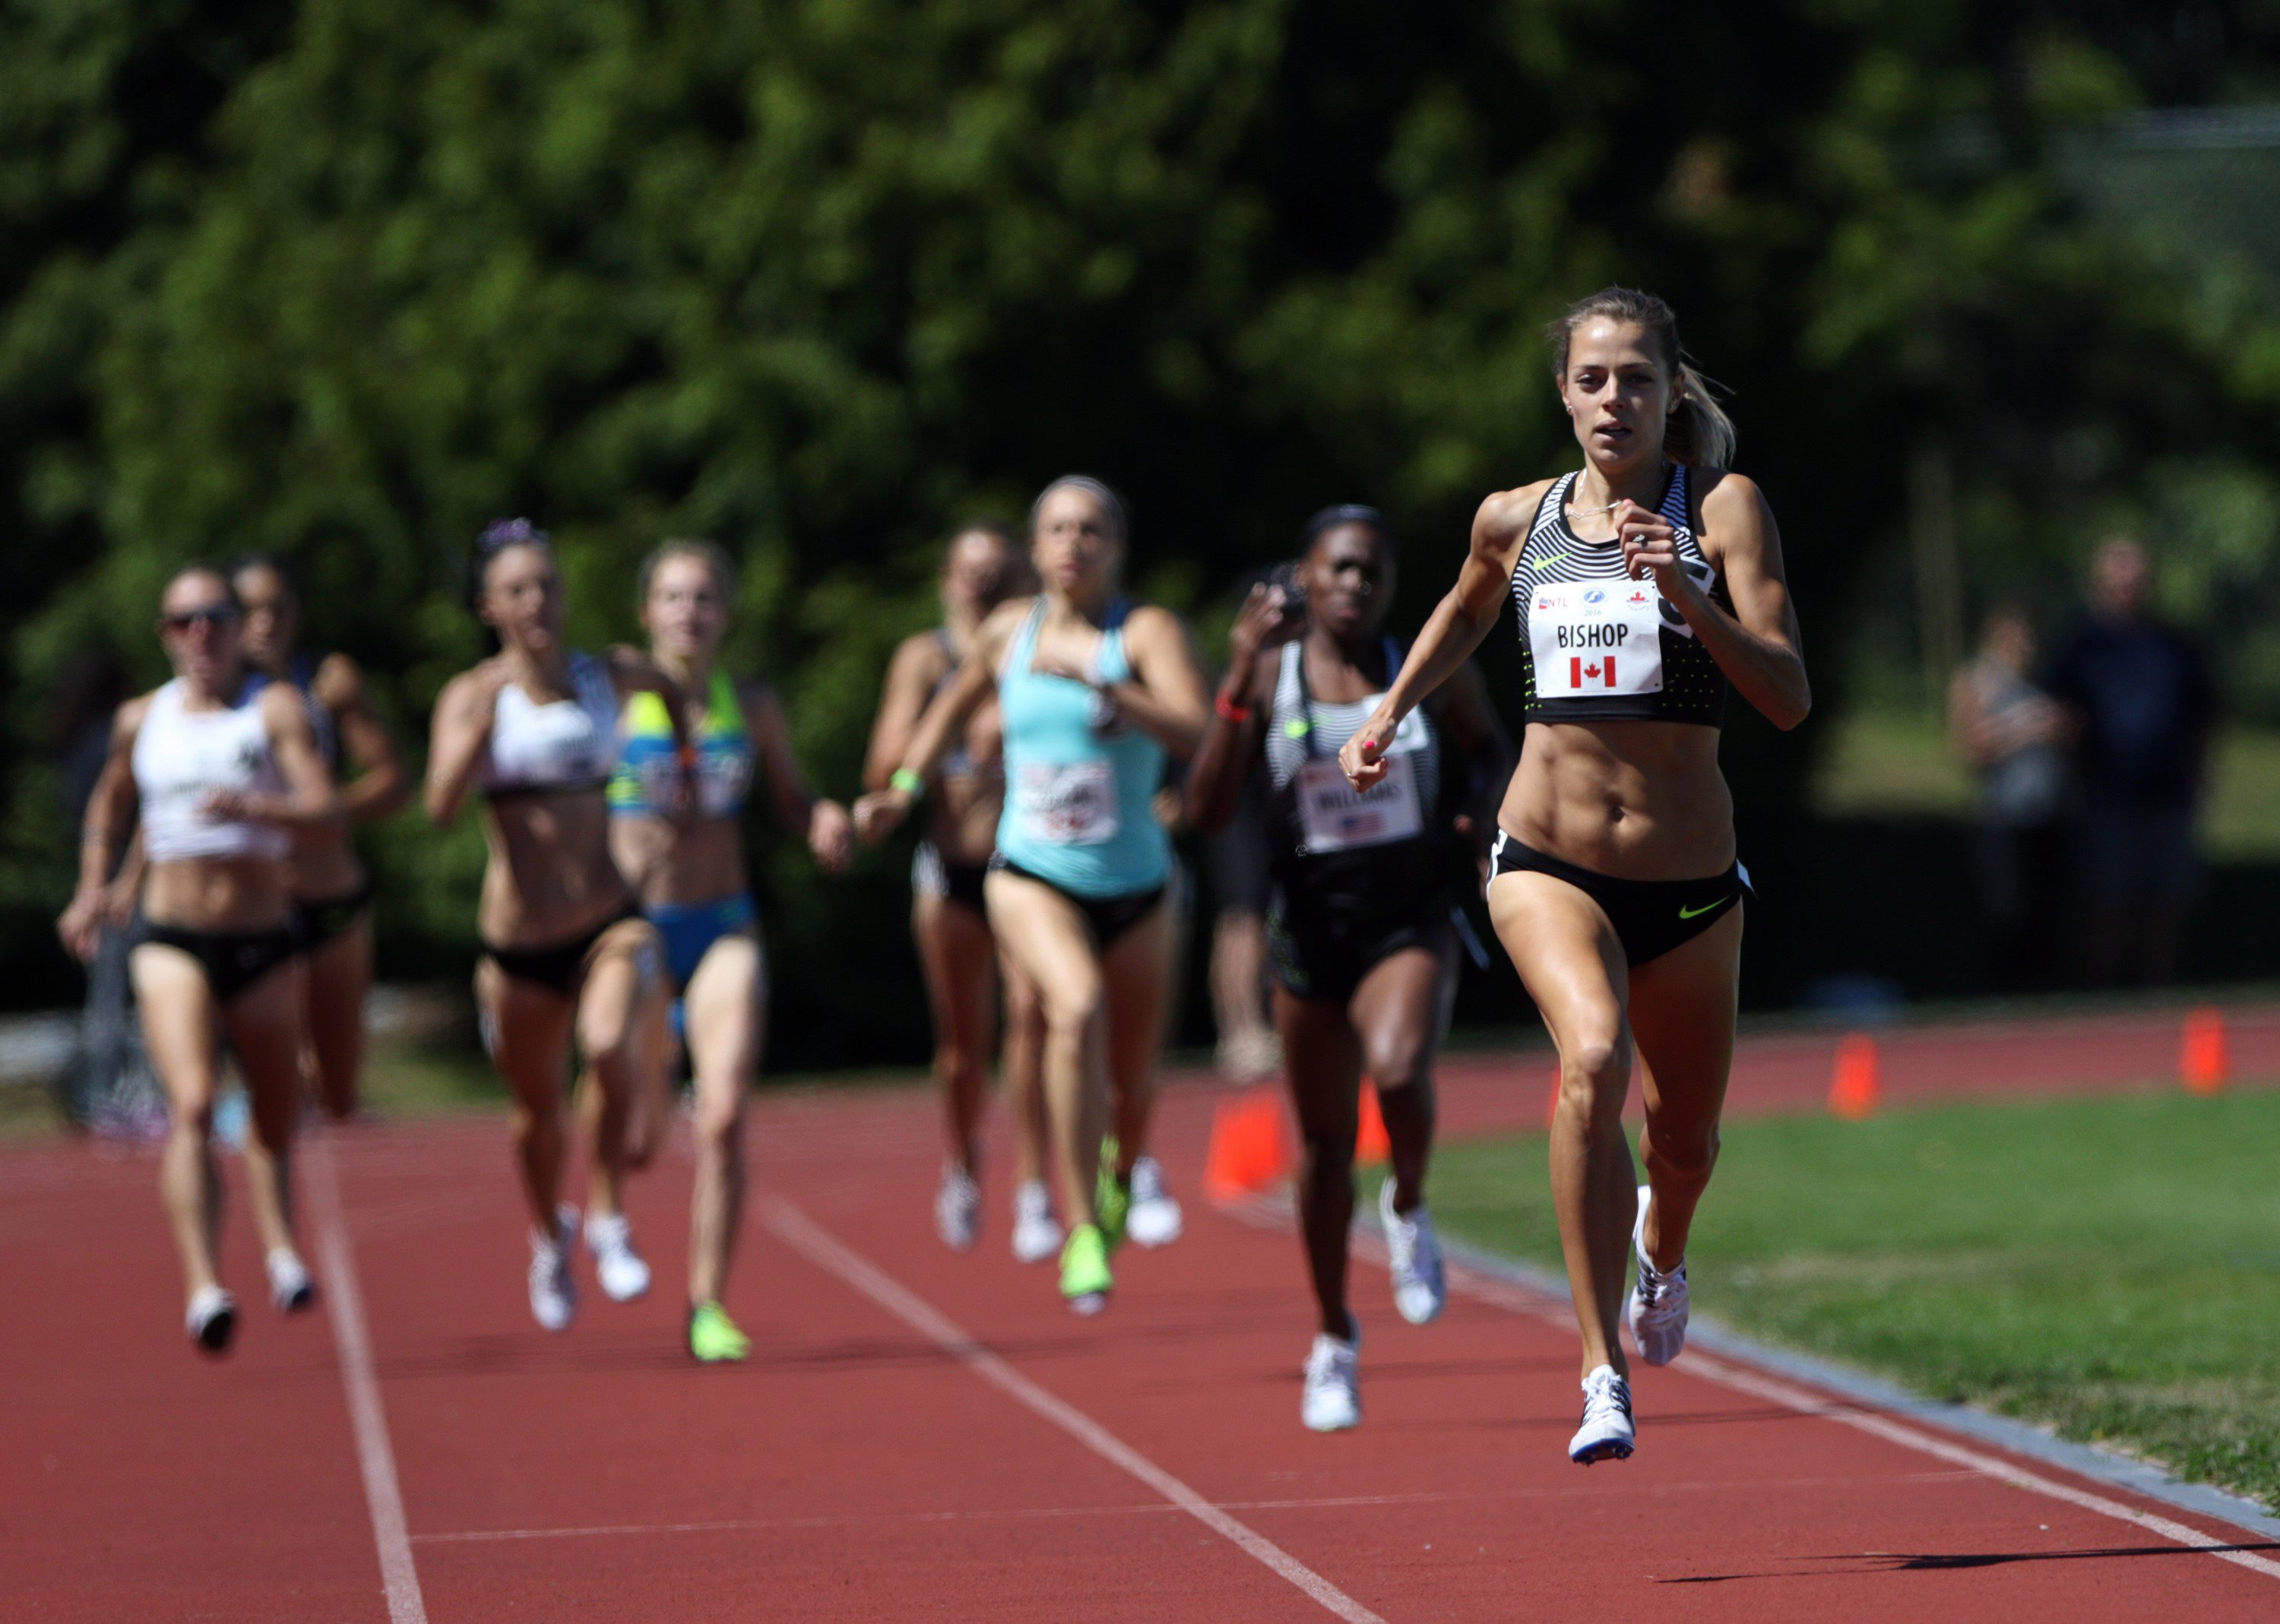 Melissa Bishop wins the 800m with a time of 1:58:90 during the Victoria Track Classic at the University of Victoria in Victoria, B.C., Sunday, June 19, 2016. THE CANADIAN PRESS/Chad Hipolito